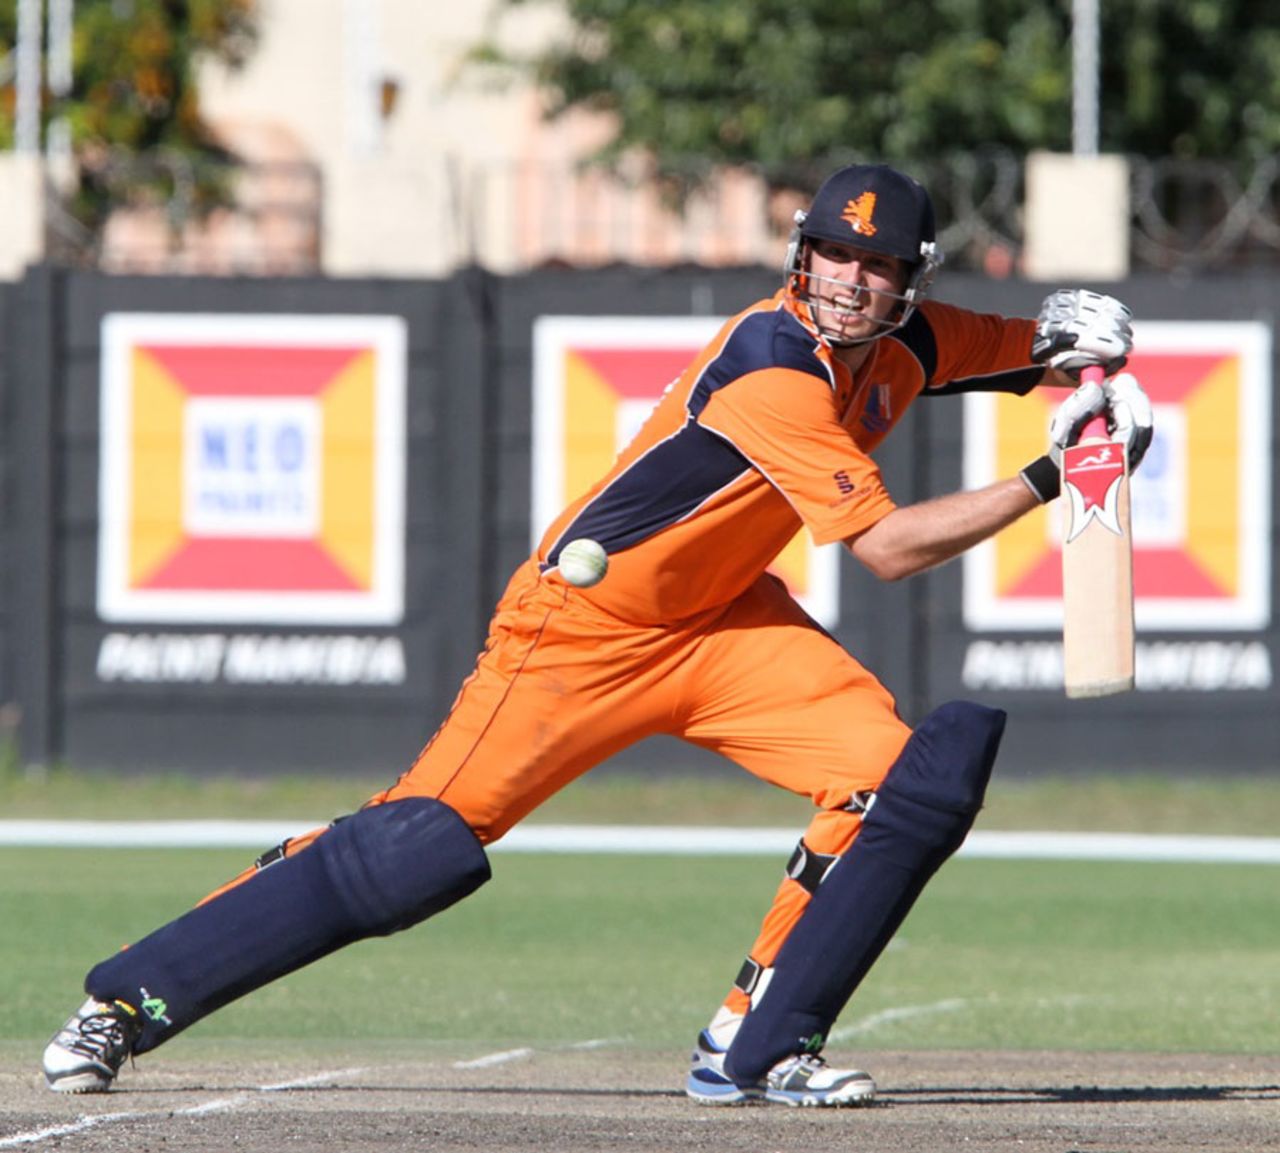 Daan van Bunge drives during his innings of 60, Namibia v Netherlands, ICC World Cricket League Championship, Windhoek, April 18, 2013